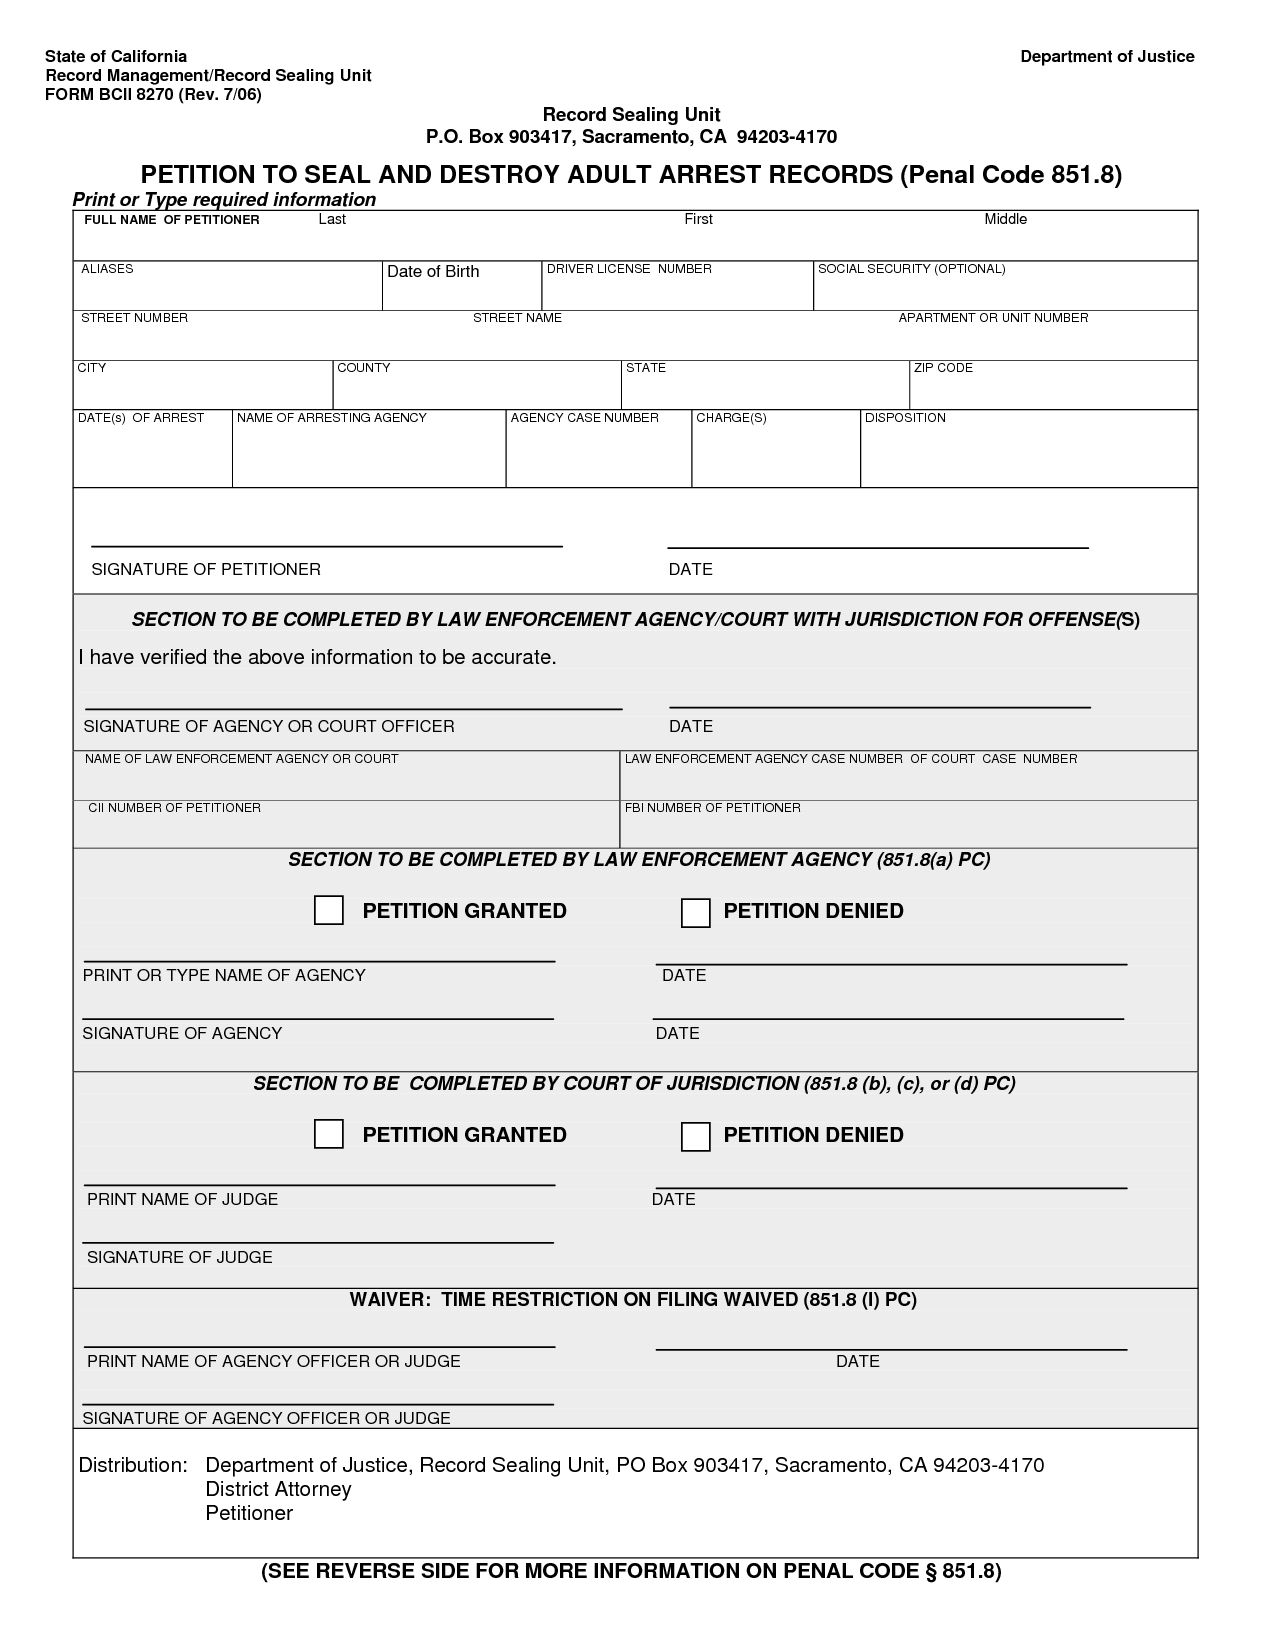 Arrest Record Template | Ca – Criminal – Petition To Seal Within Autopsy Report Template